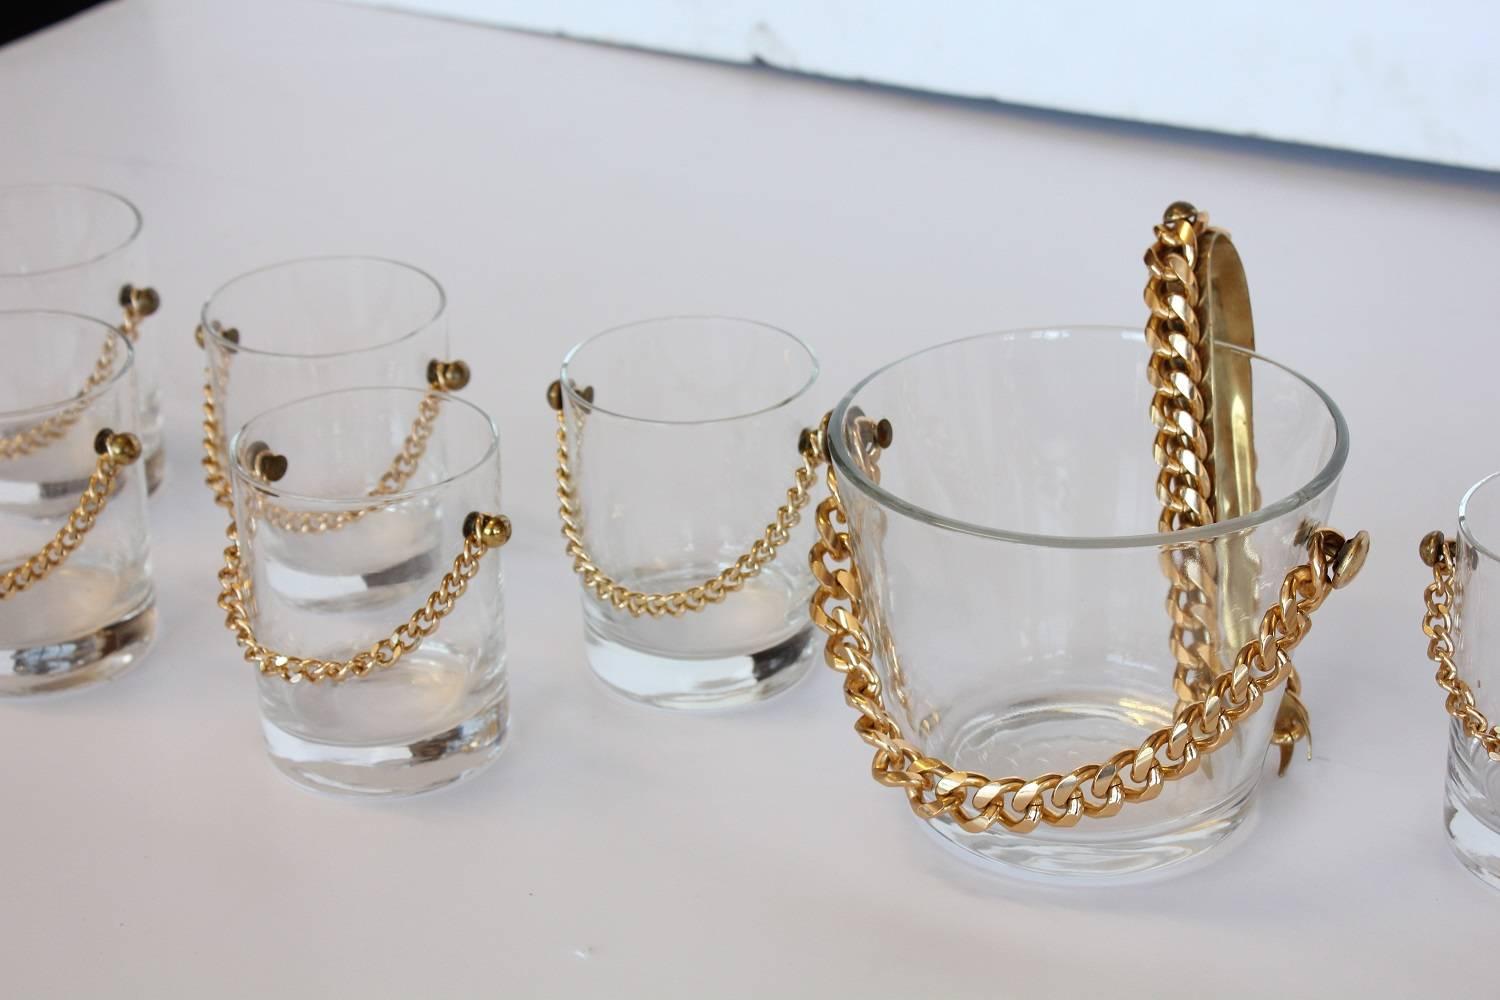 Stylish modern glassware set with brass chain. Set includes ten glasses and ice bucket. Measures: Ice bucket: H: 5